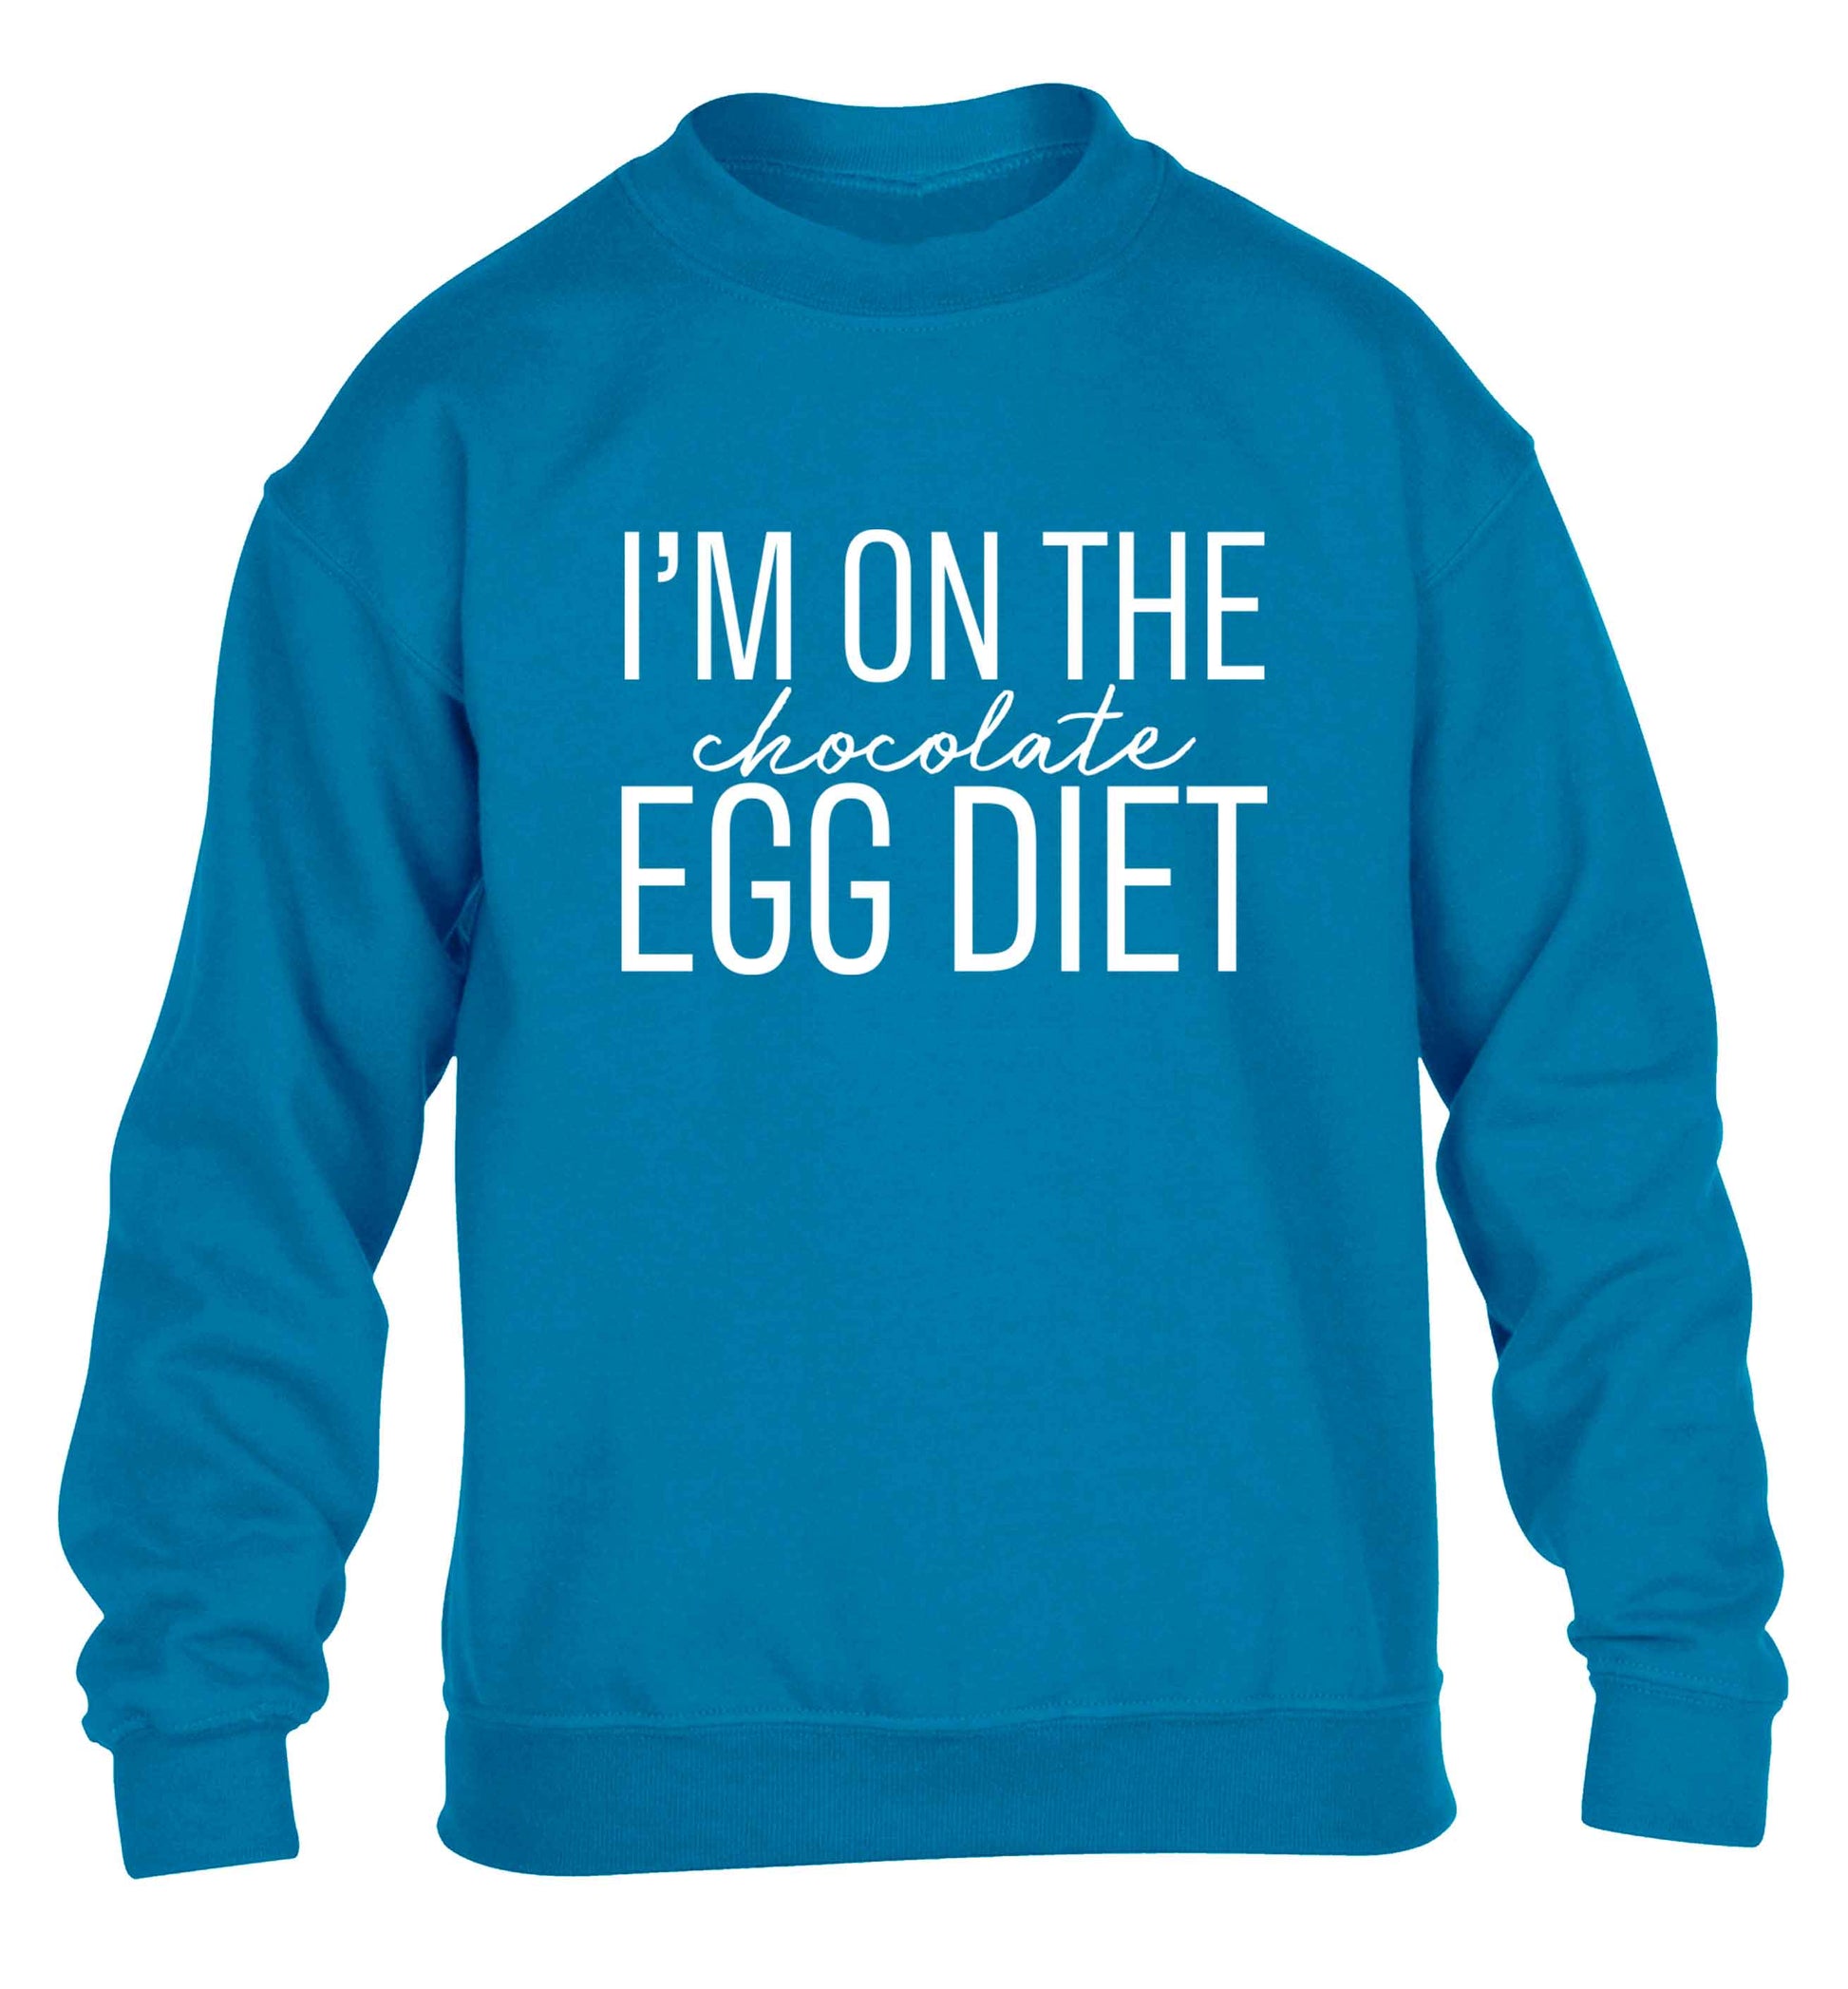 I'm on the chocolate egg diet children's blue sweater 12-13 Years